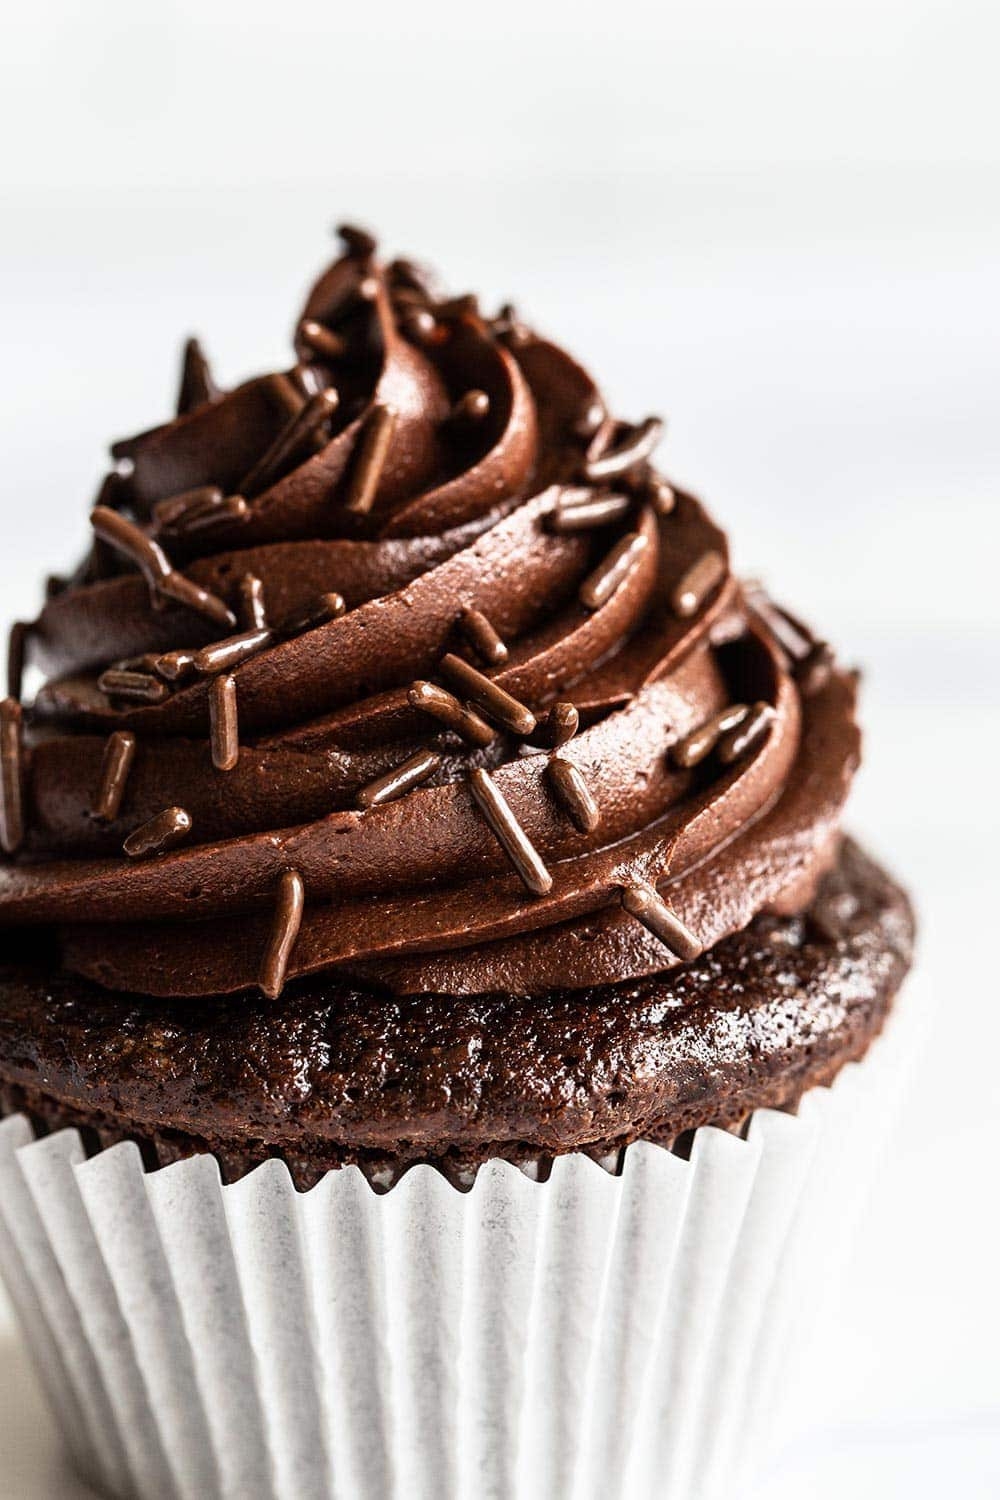 Chocolate Cupcakes With Popkins 